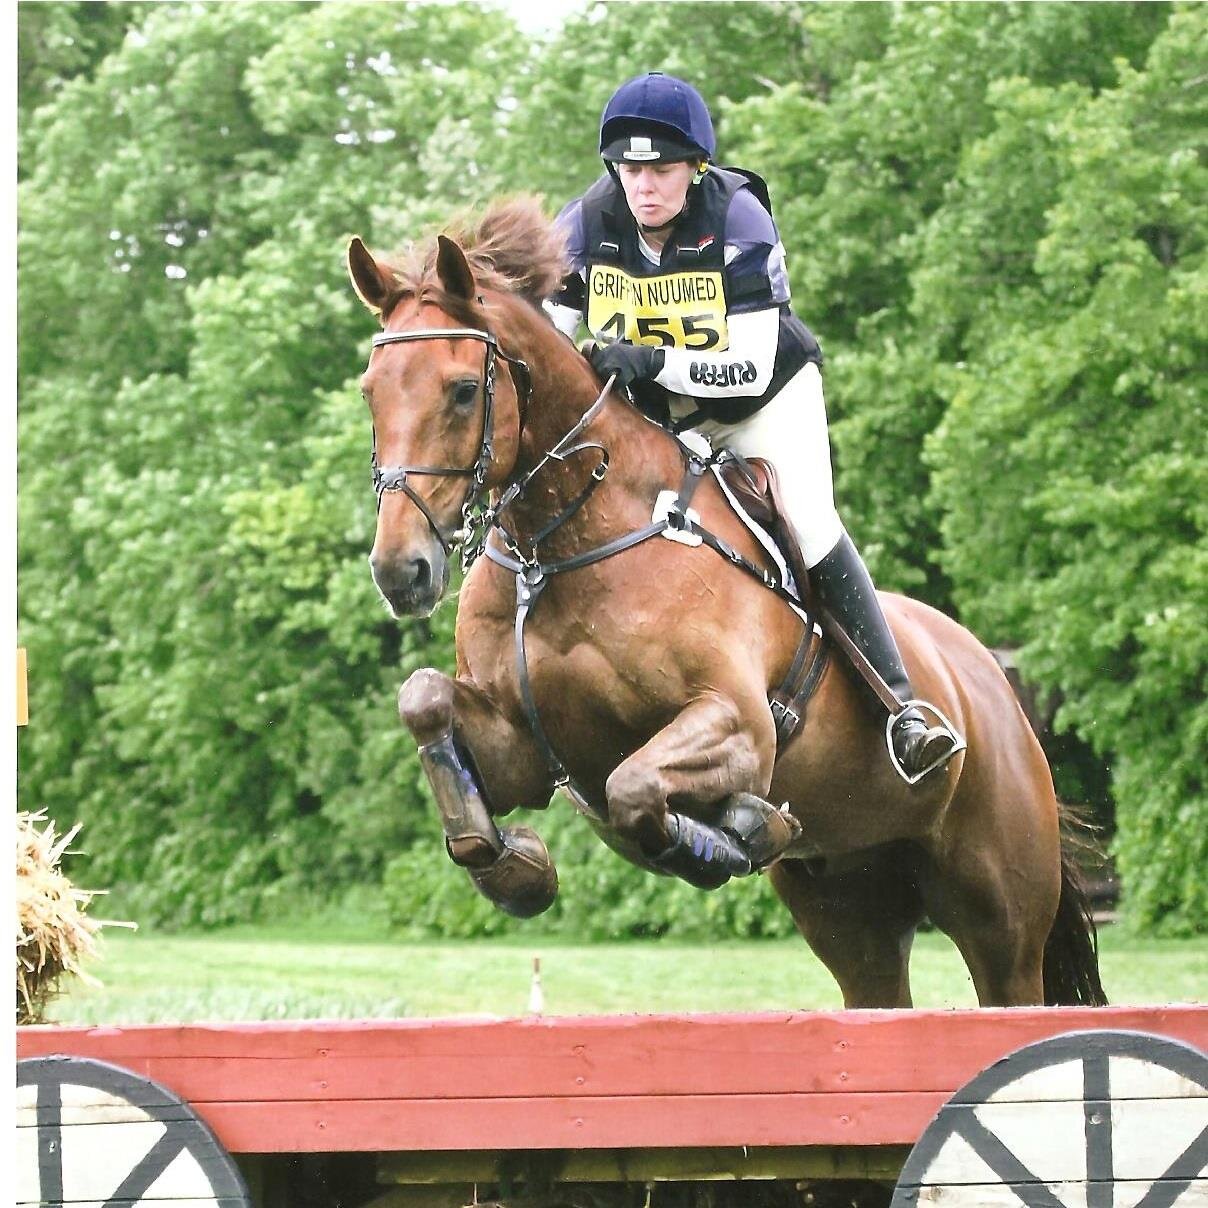 A working rider competing BE and BD to see how far she can get.  Also co-owner of a small livery business in Cornwall.